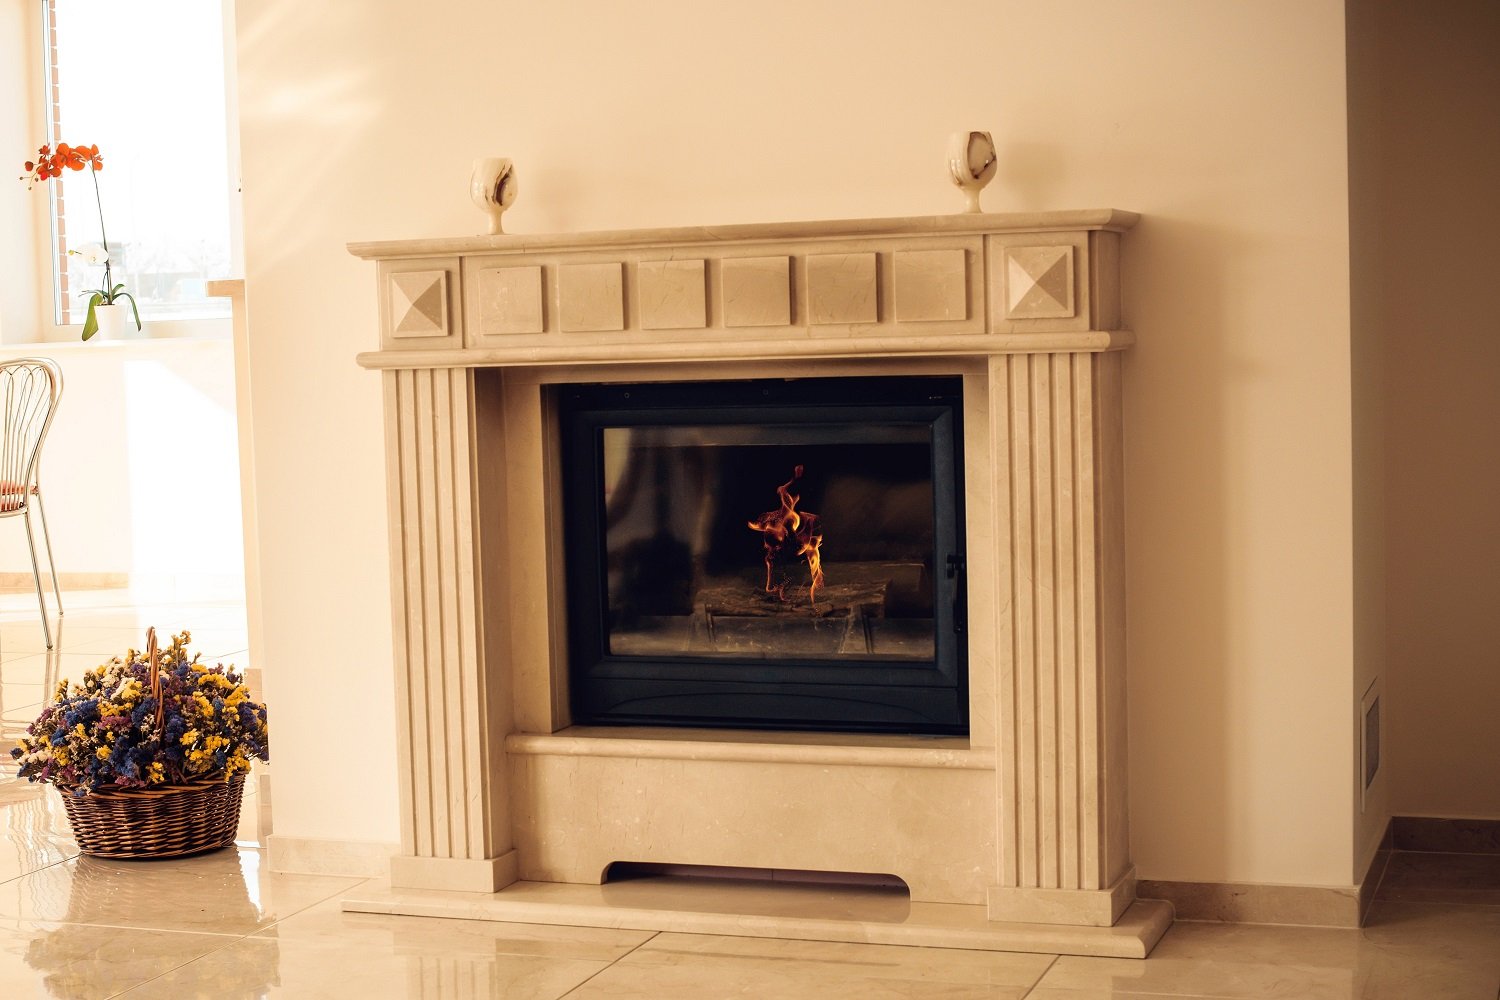 How To Paint A Fireplace Surround